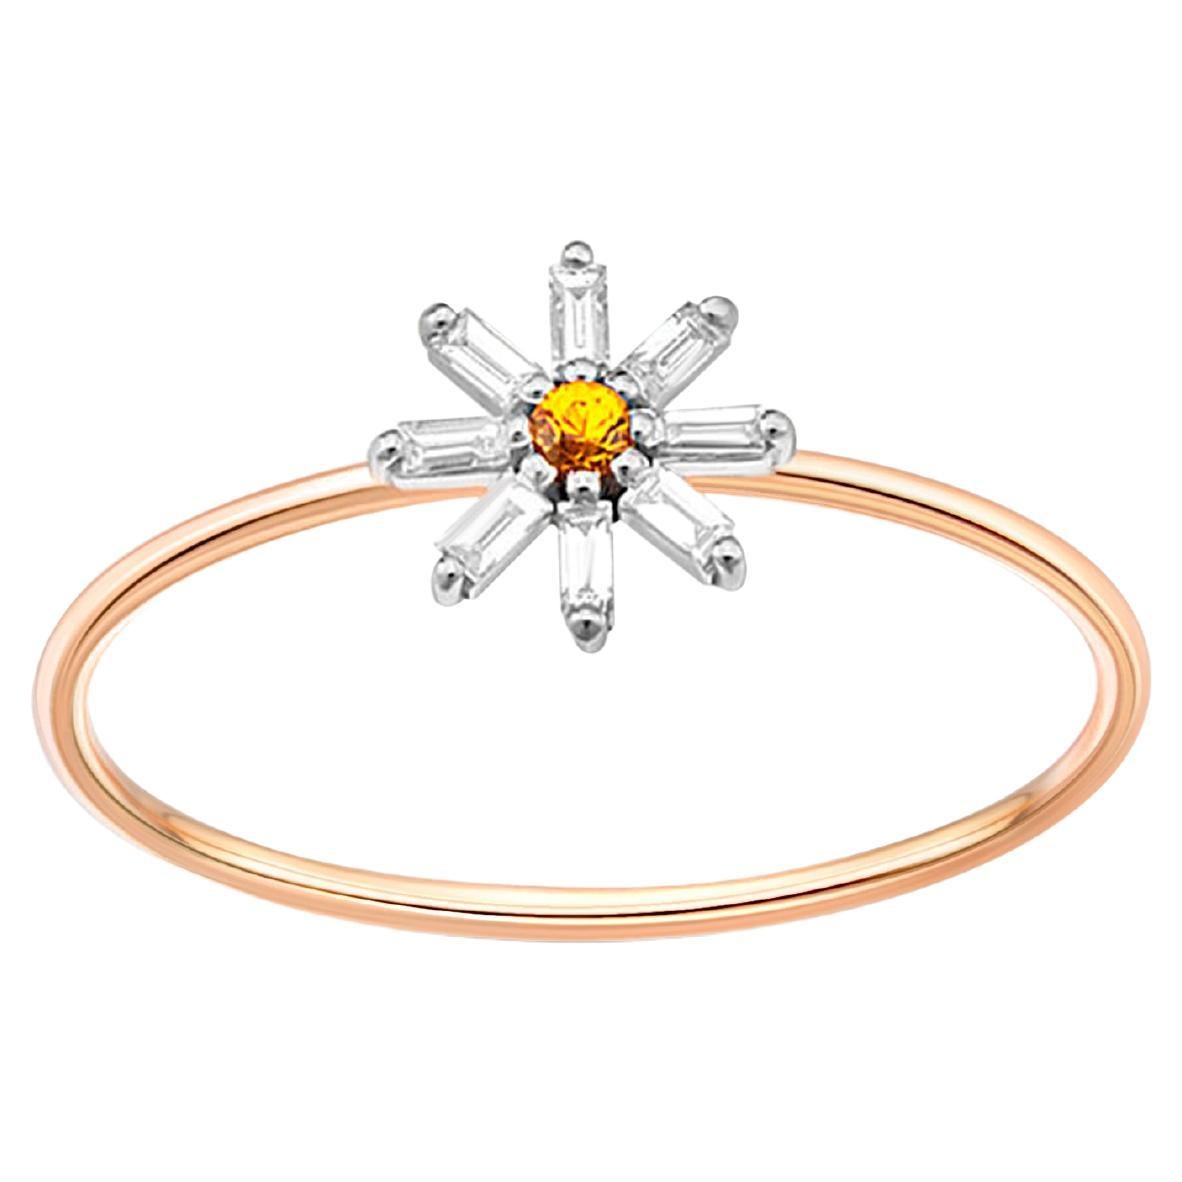 14k Gold Flower Wedding Ring. Cute Daisy Stackable Gold Ring.